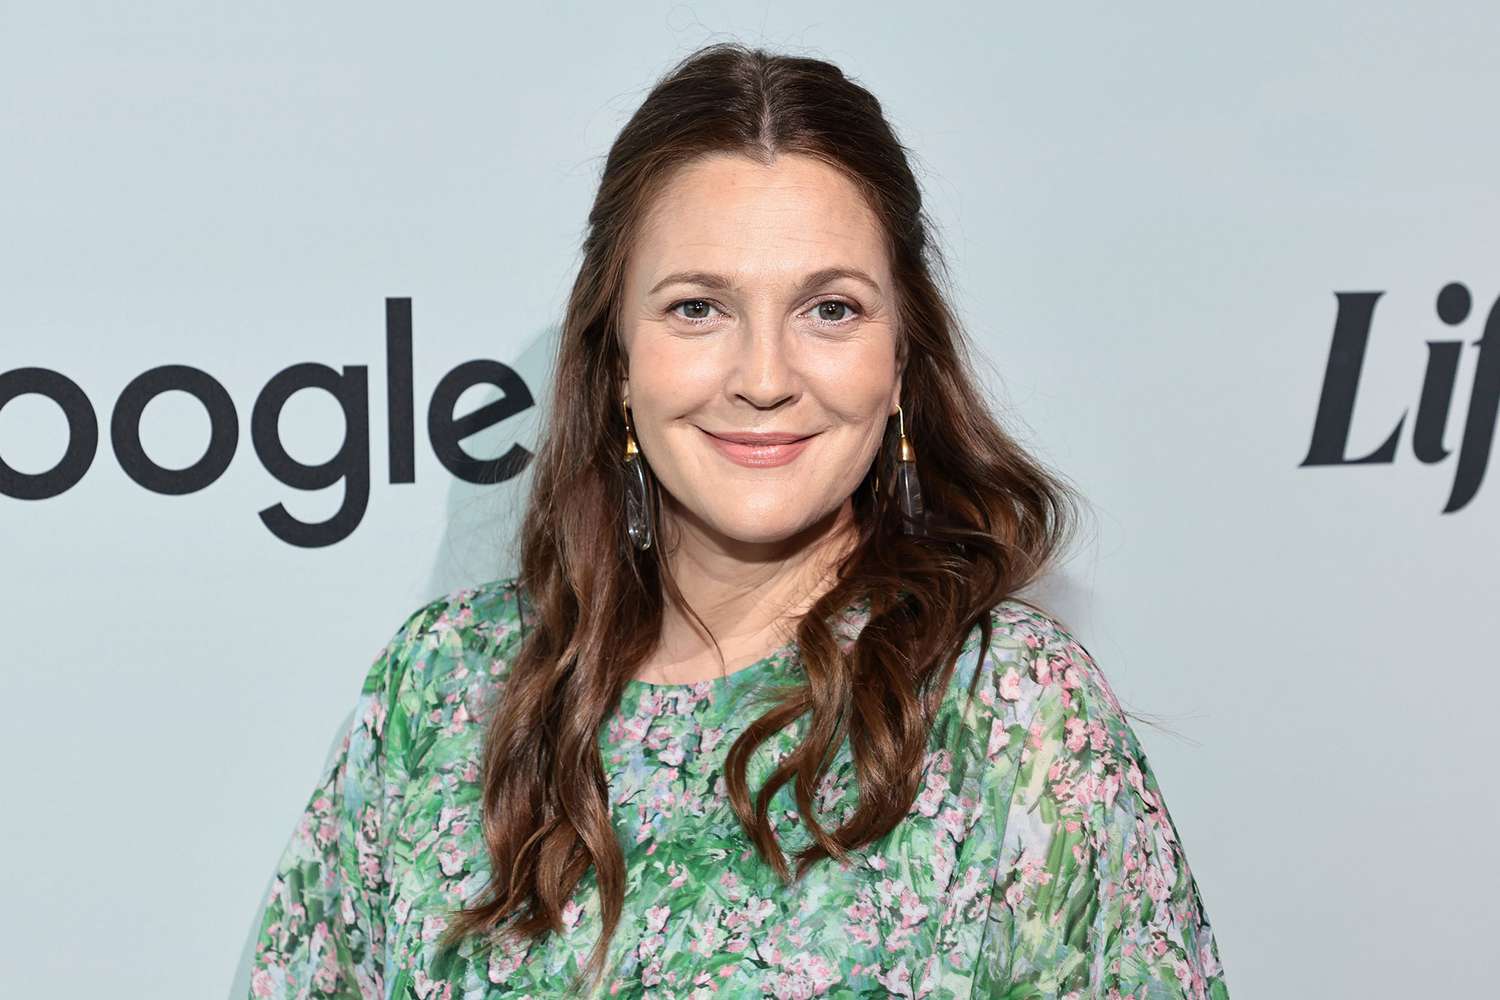 Drew Barrymore attends Variety's 2022 Power Of Women: New York Event Presented By Lifetime at The Glasshouse on May 05, 2022 in New York City.